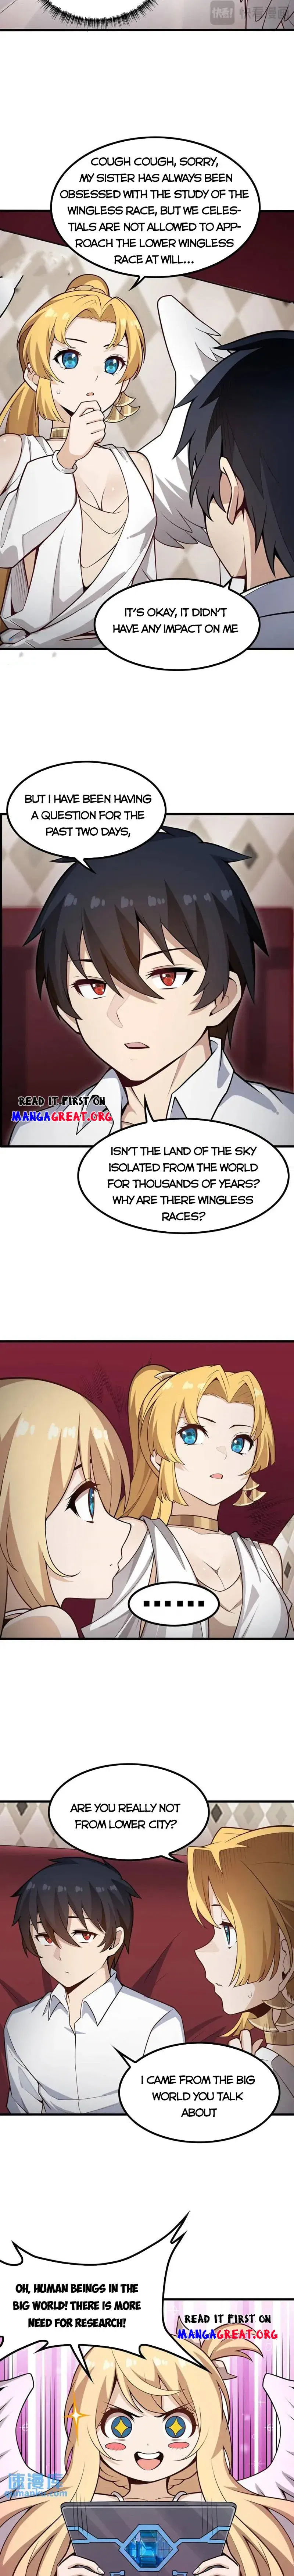 Infinite Apostles and Twelve War Girls Chapter 375 page 4